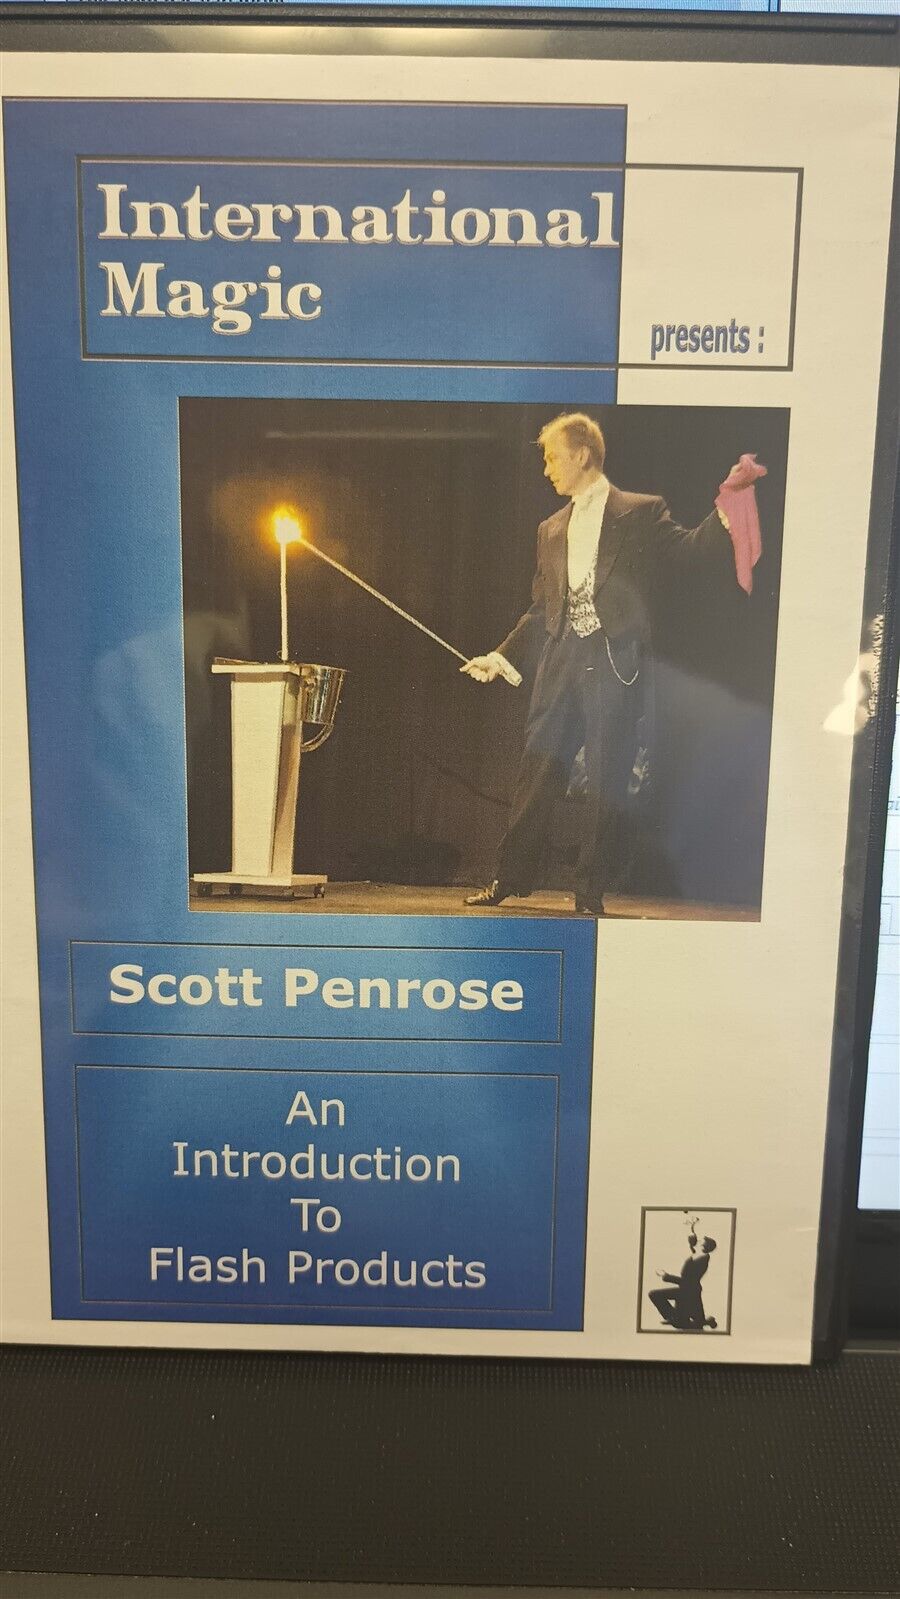 An Introduction to Flash Products by Scott Penrose and International Magic - DVD